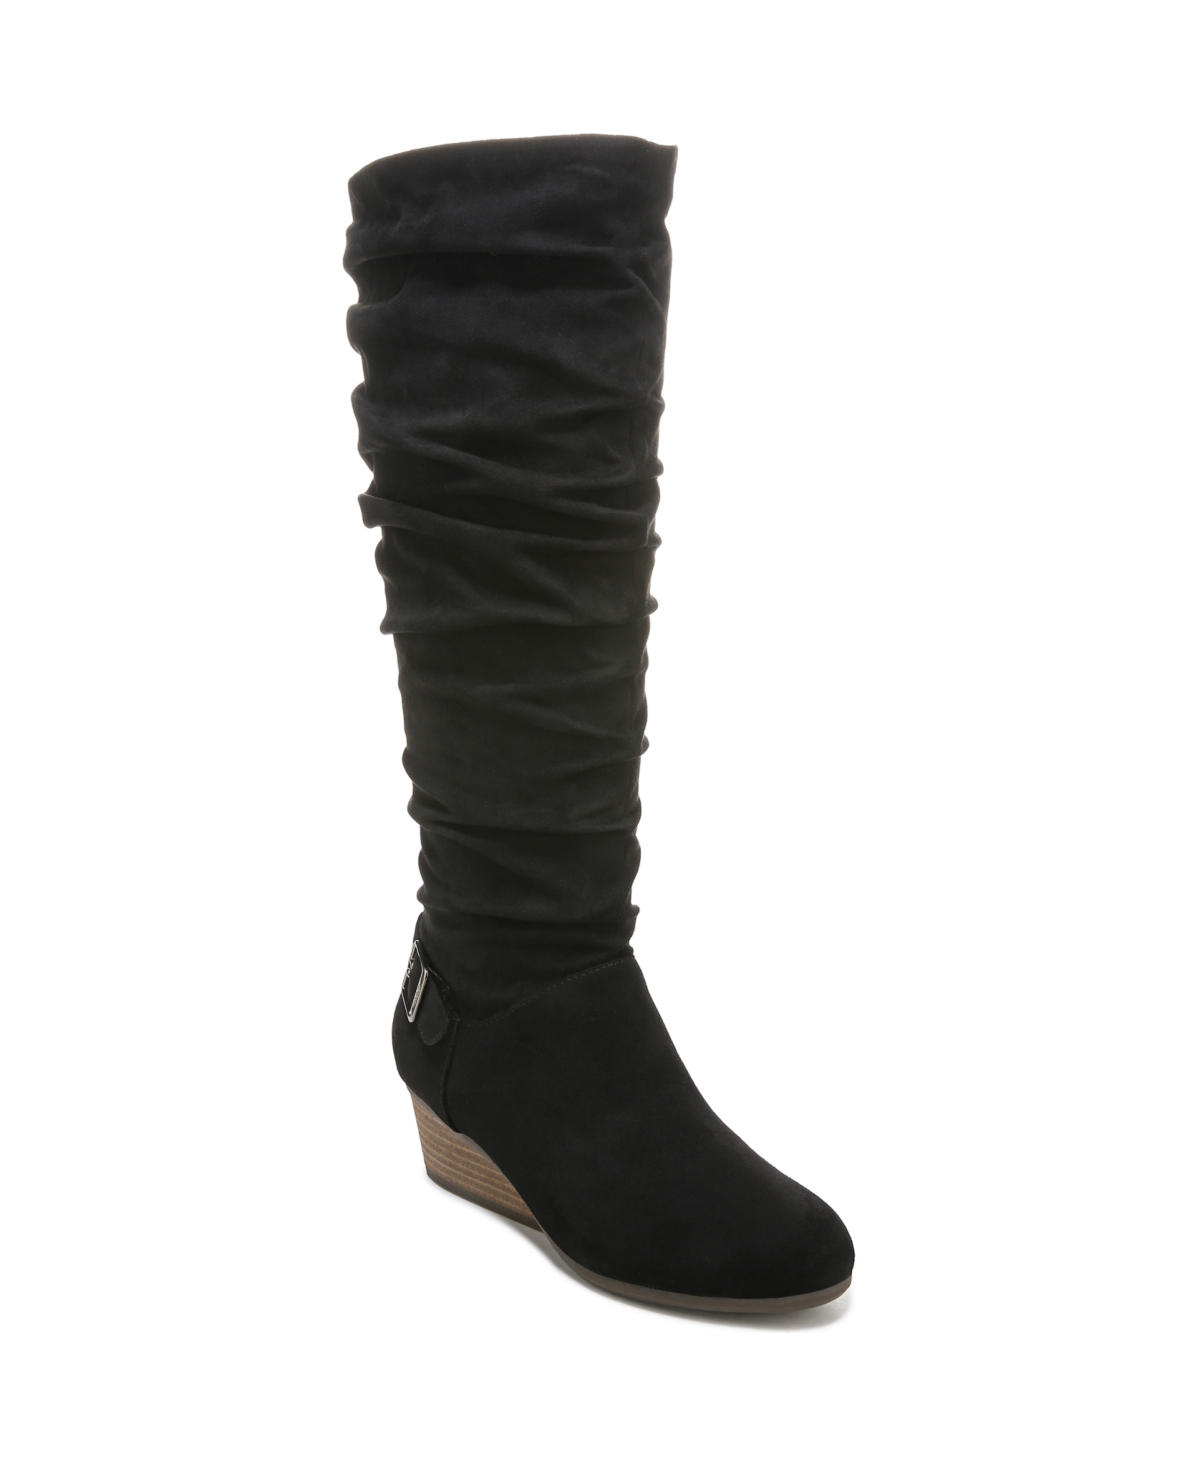 UPC 736715605888 product image for Dr. Scholl's Women's Break Free High Shaft Boots Women's Shoes | upcitemdb.com